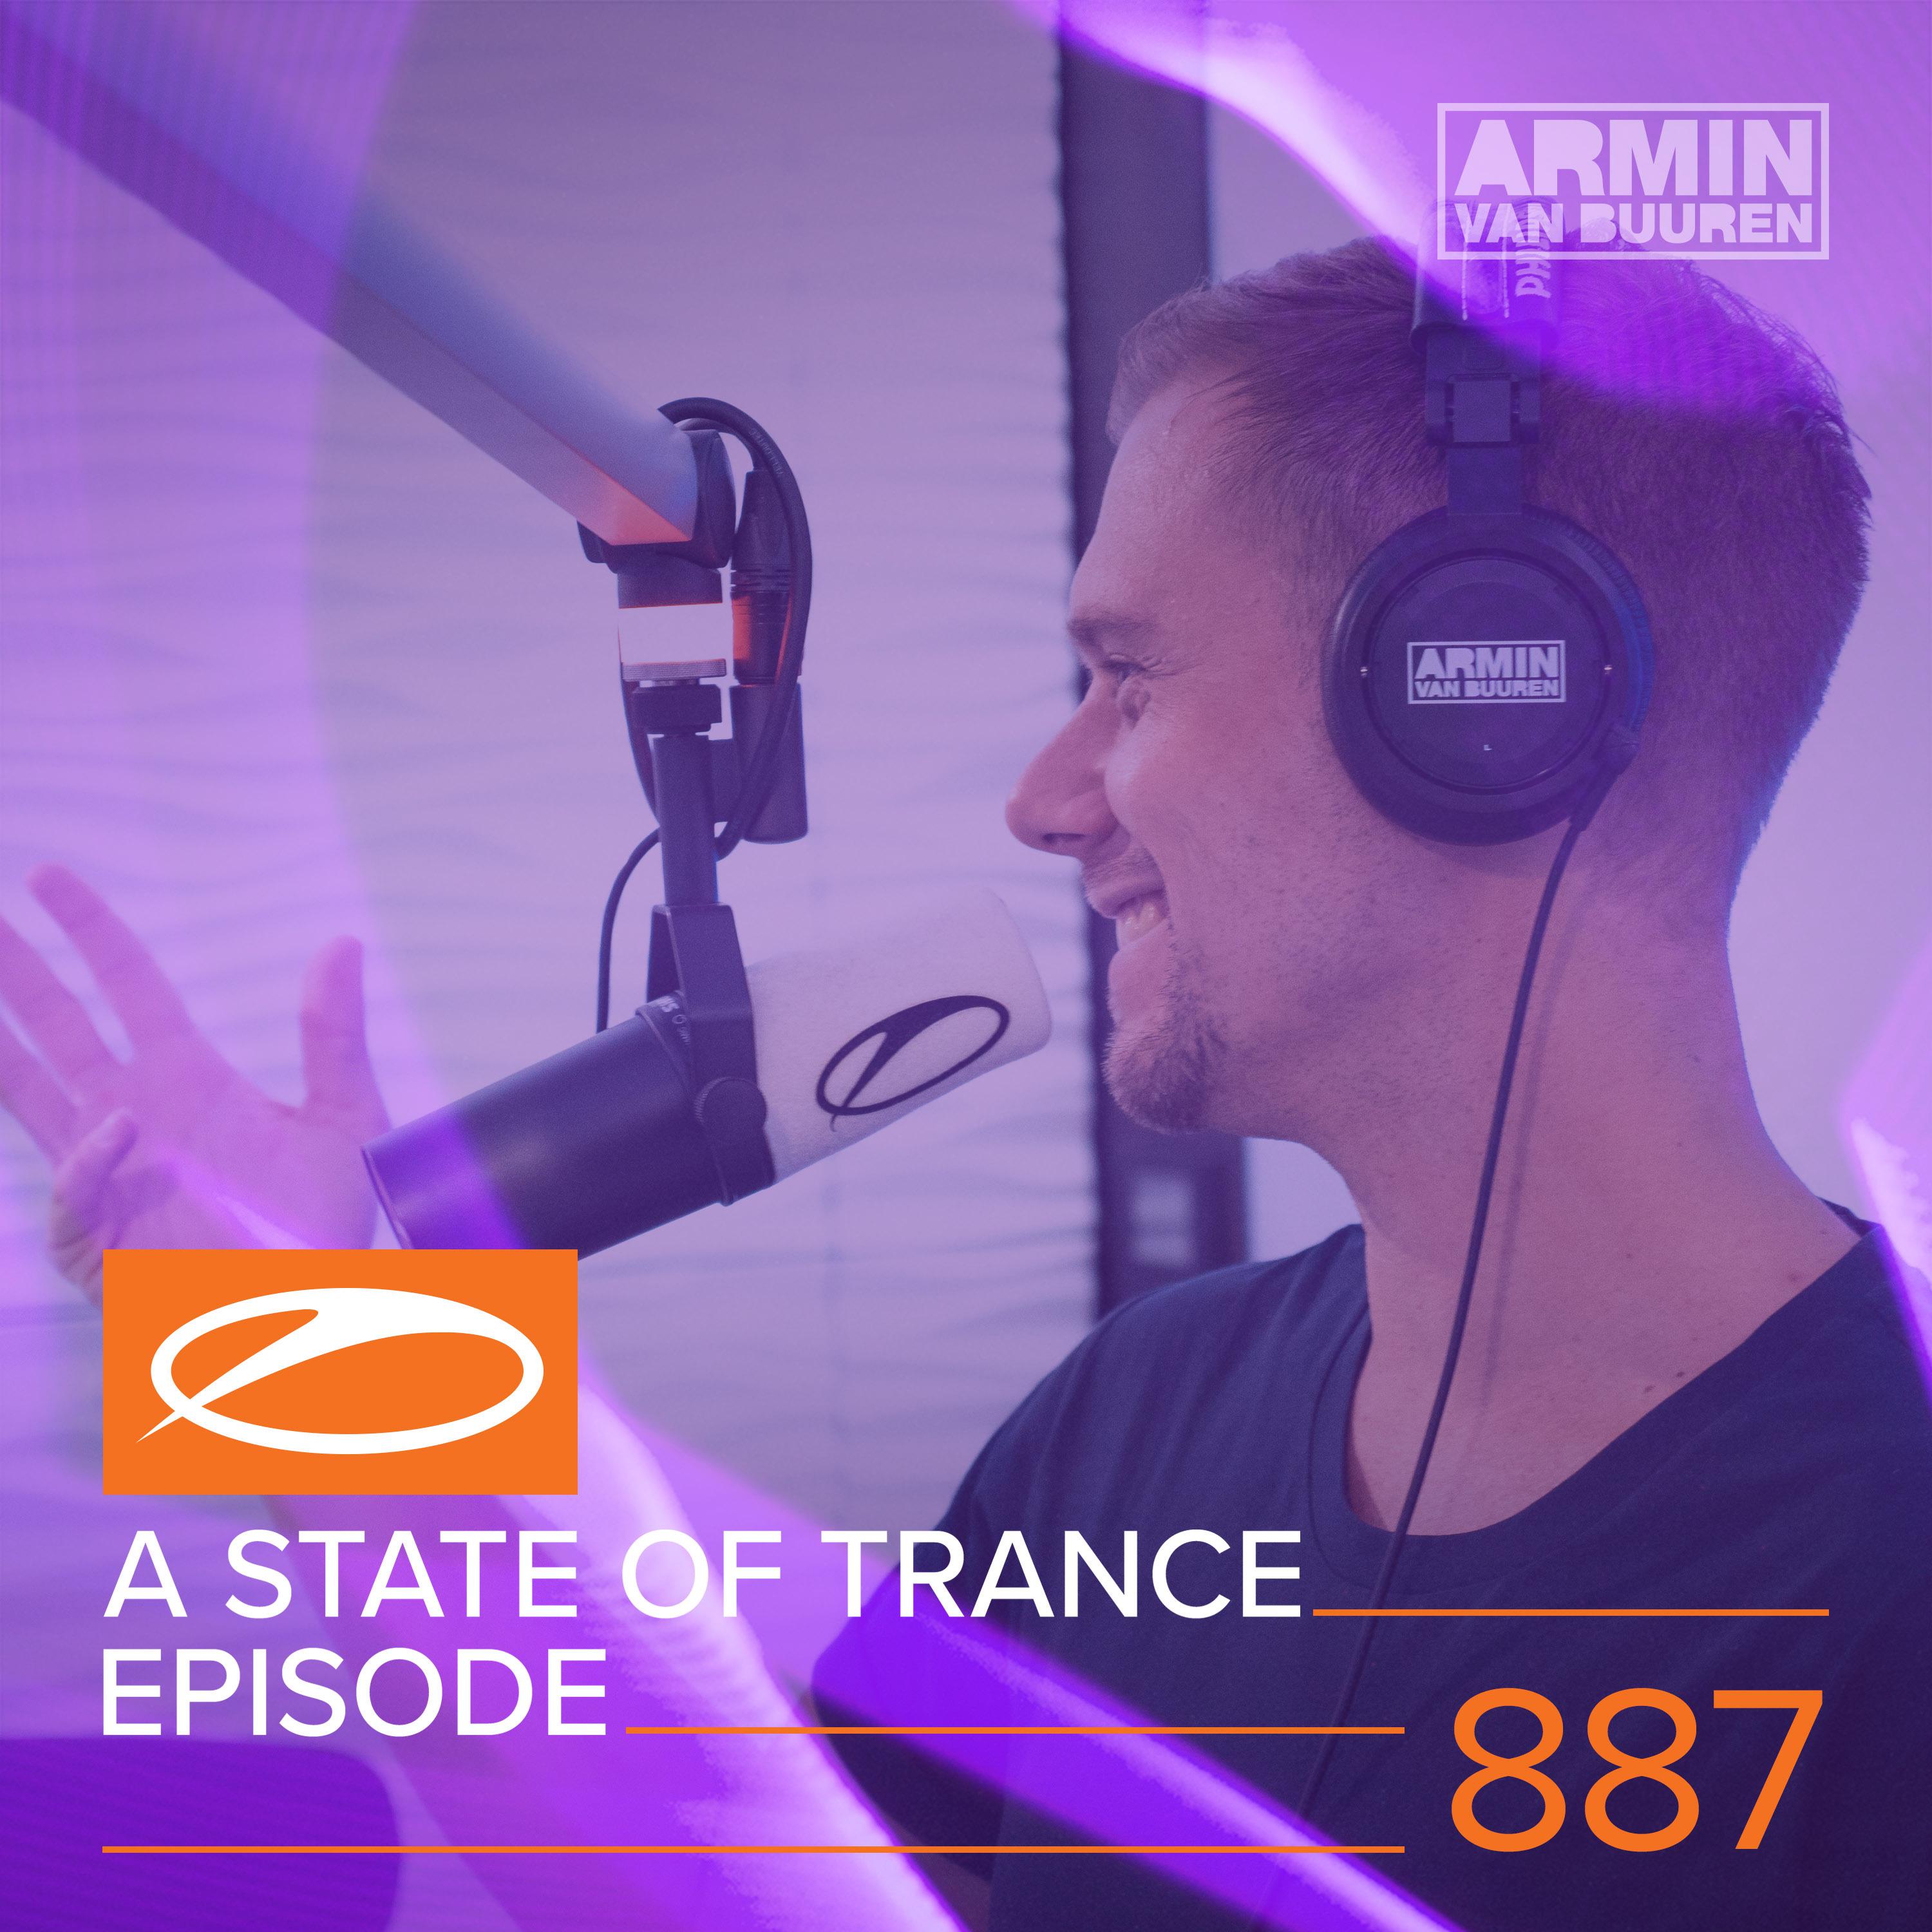 For You (ASOT 887)